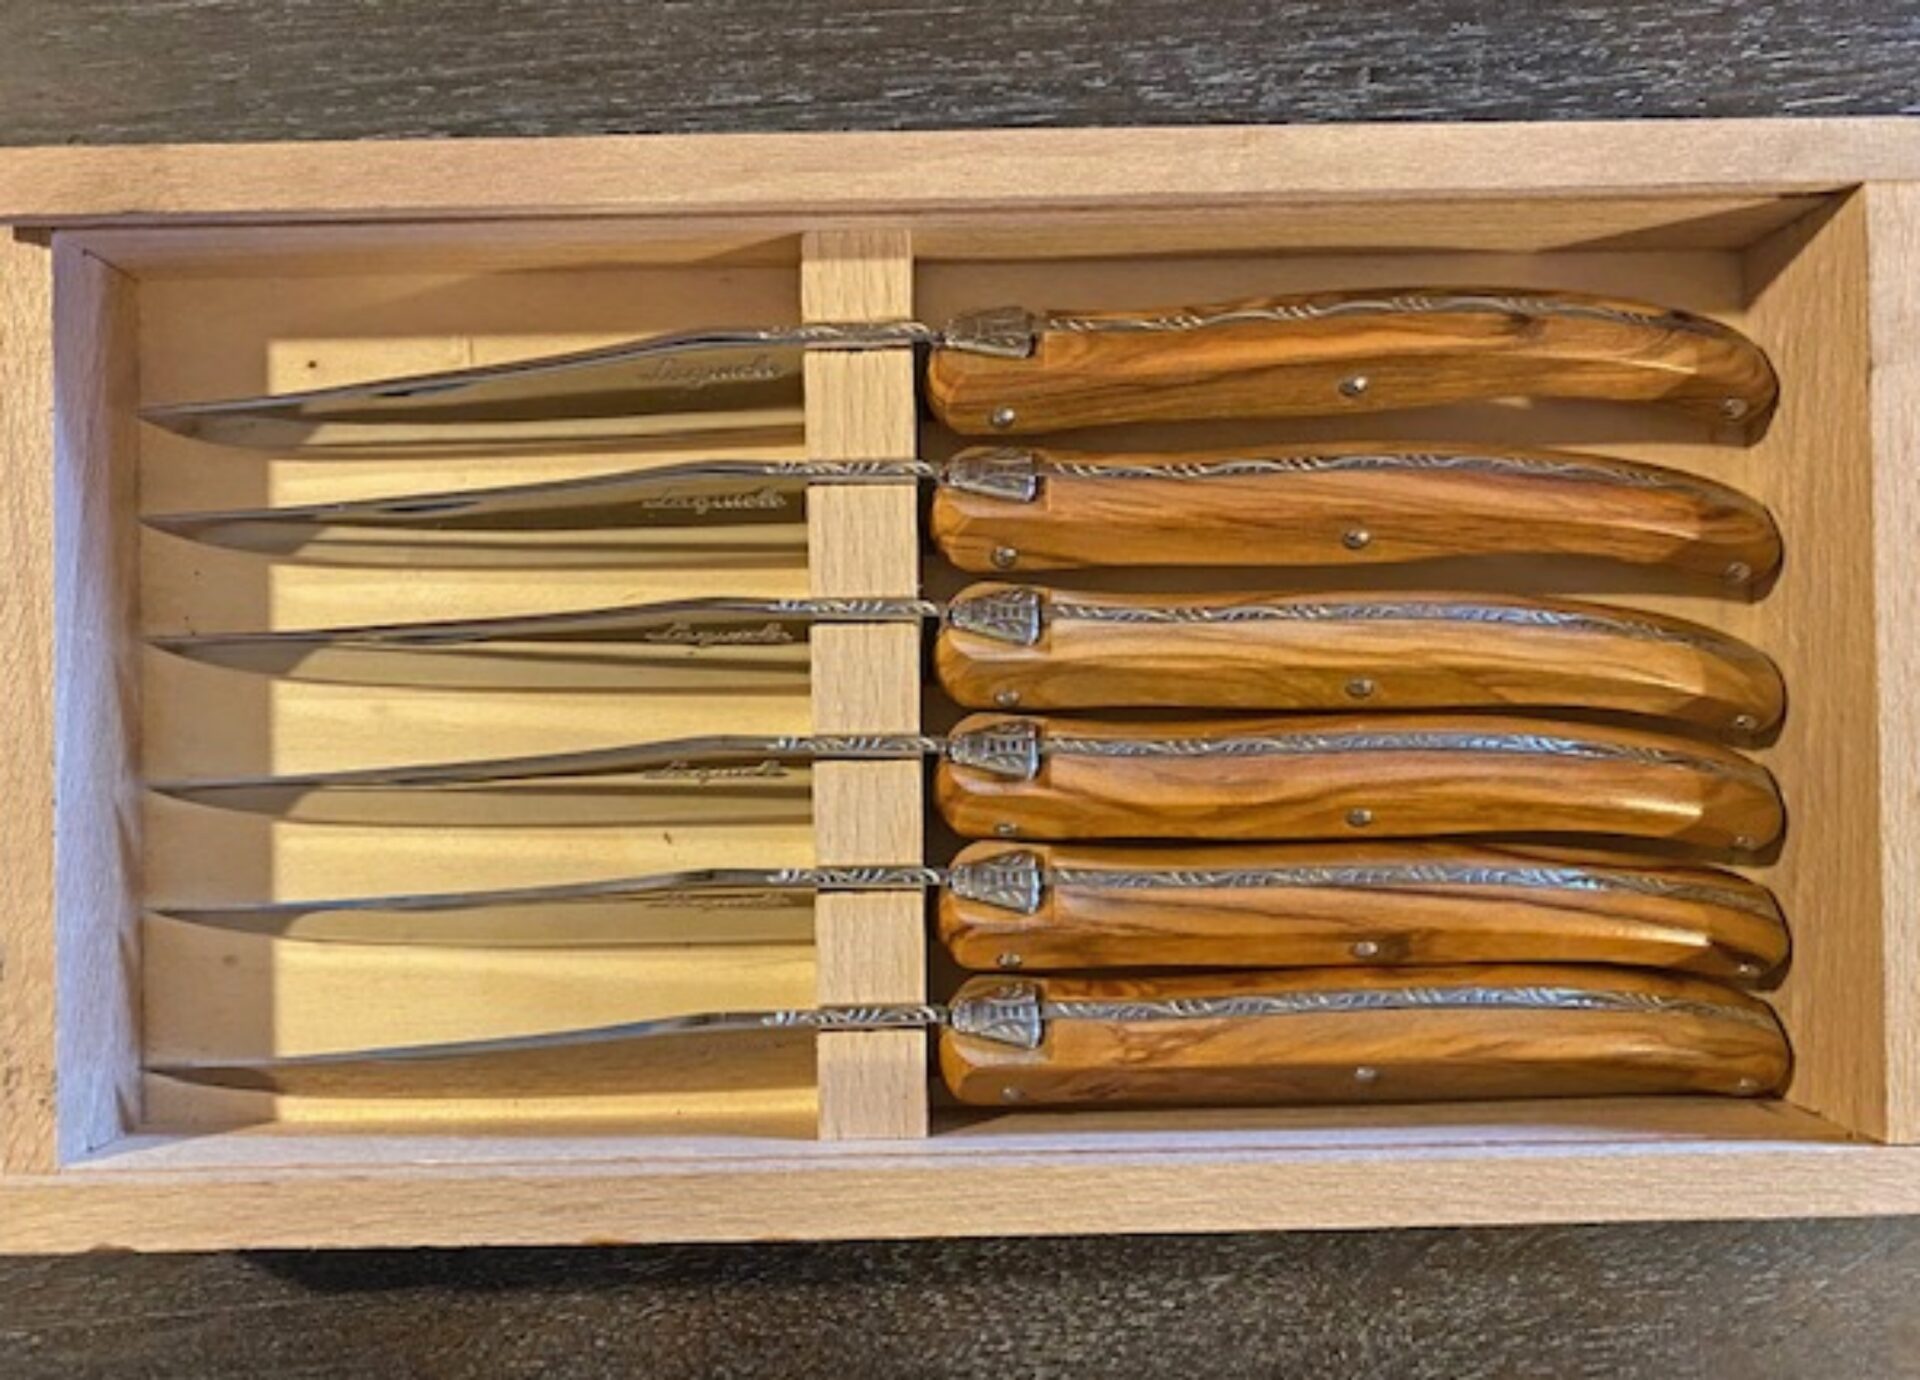 Six Piece Olive Wood Knife Set in a Wooden Box